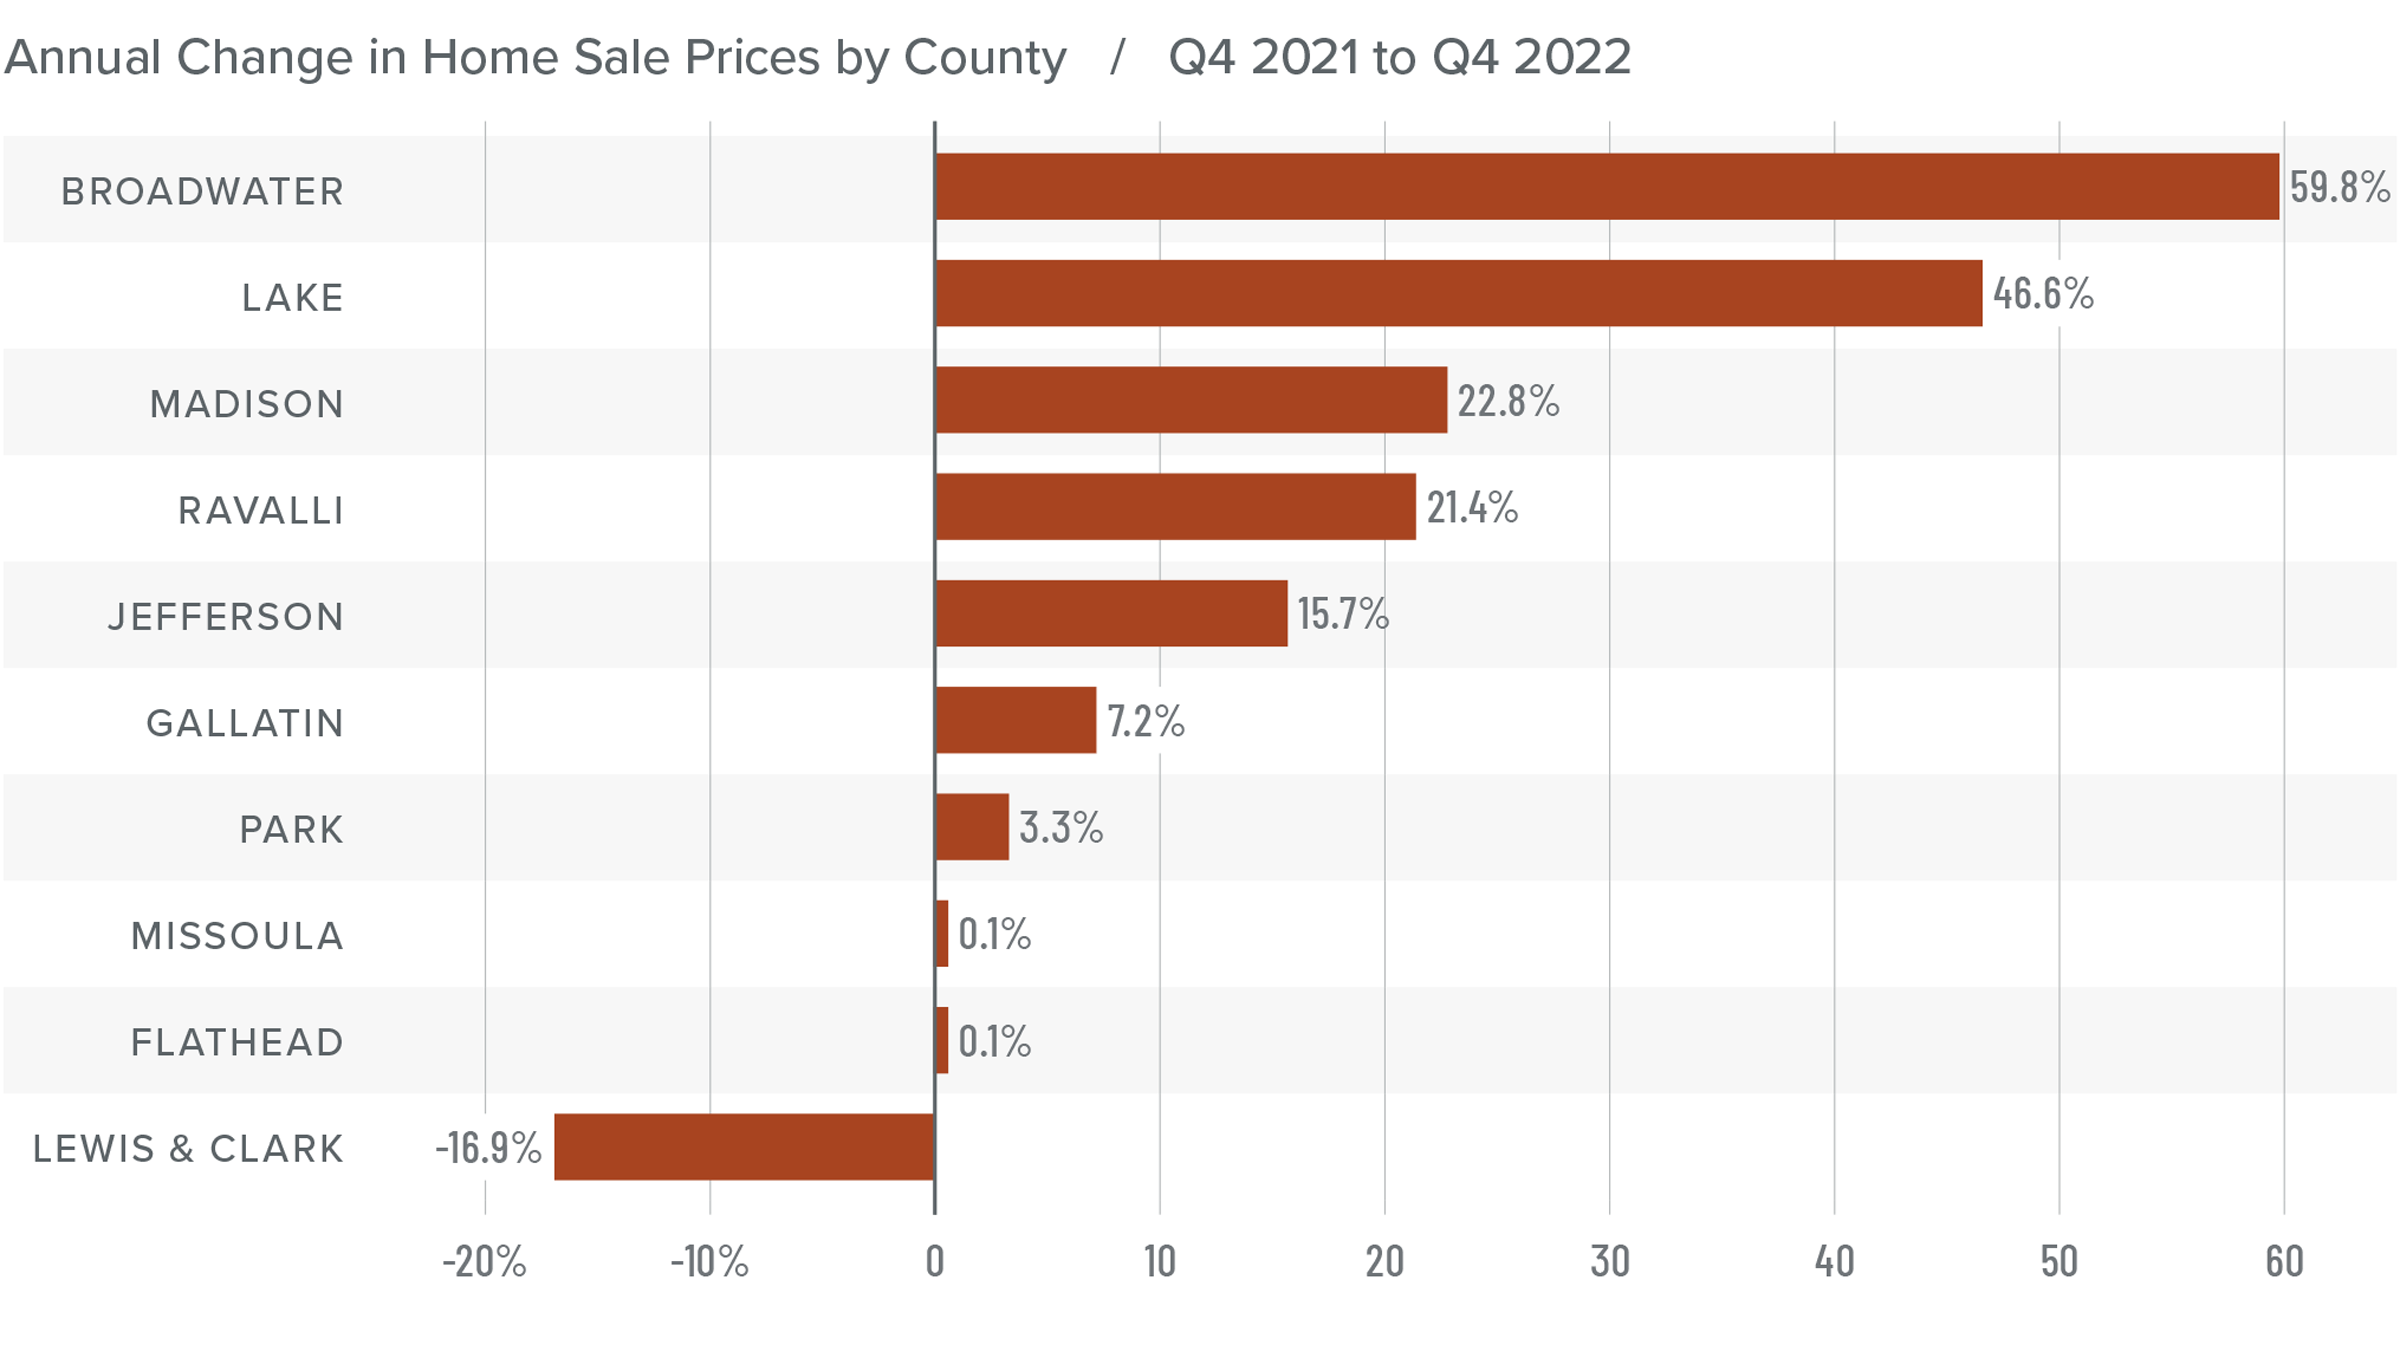 A bar graph showing the annual change in home sale prices for various counties in Montana from Q4 2021 to Q4 2022. Broadwater County tops the list at 59.8%, followed by Lake at 46.6%, Madison at 22.8%, Ravalli at 21.4%, Jefferson at 15.7%, Gallatin at 7.2%, Park at 3.3%, Missoula and Flathead at 0.1%, and Lewis and Clark at -16.9%.